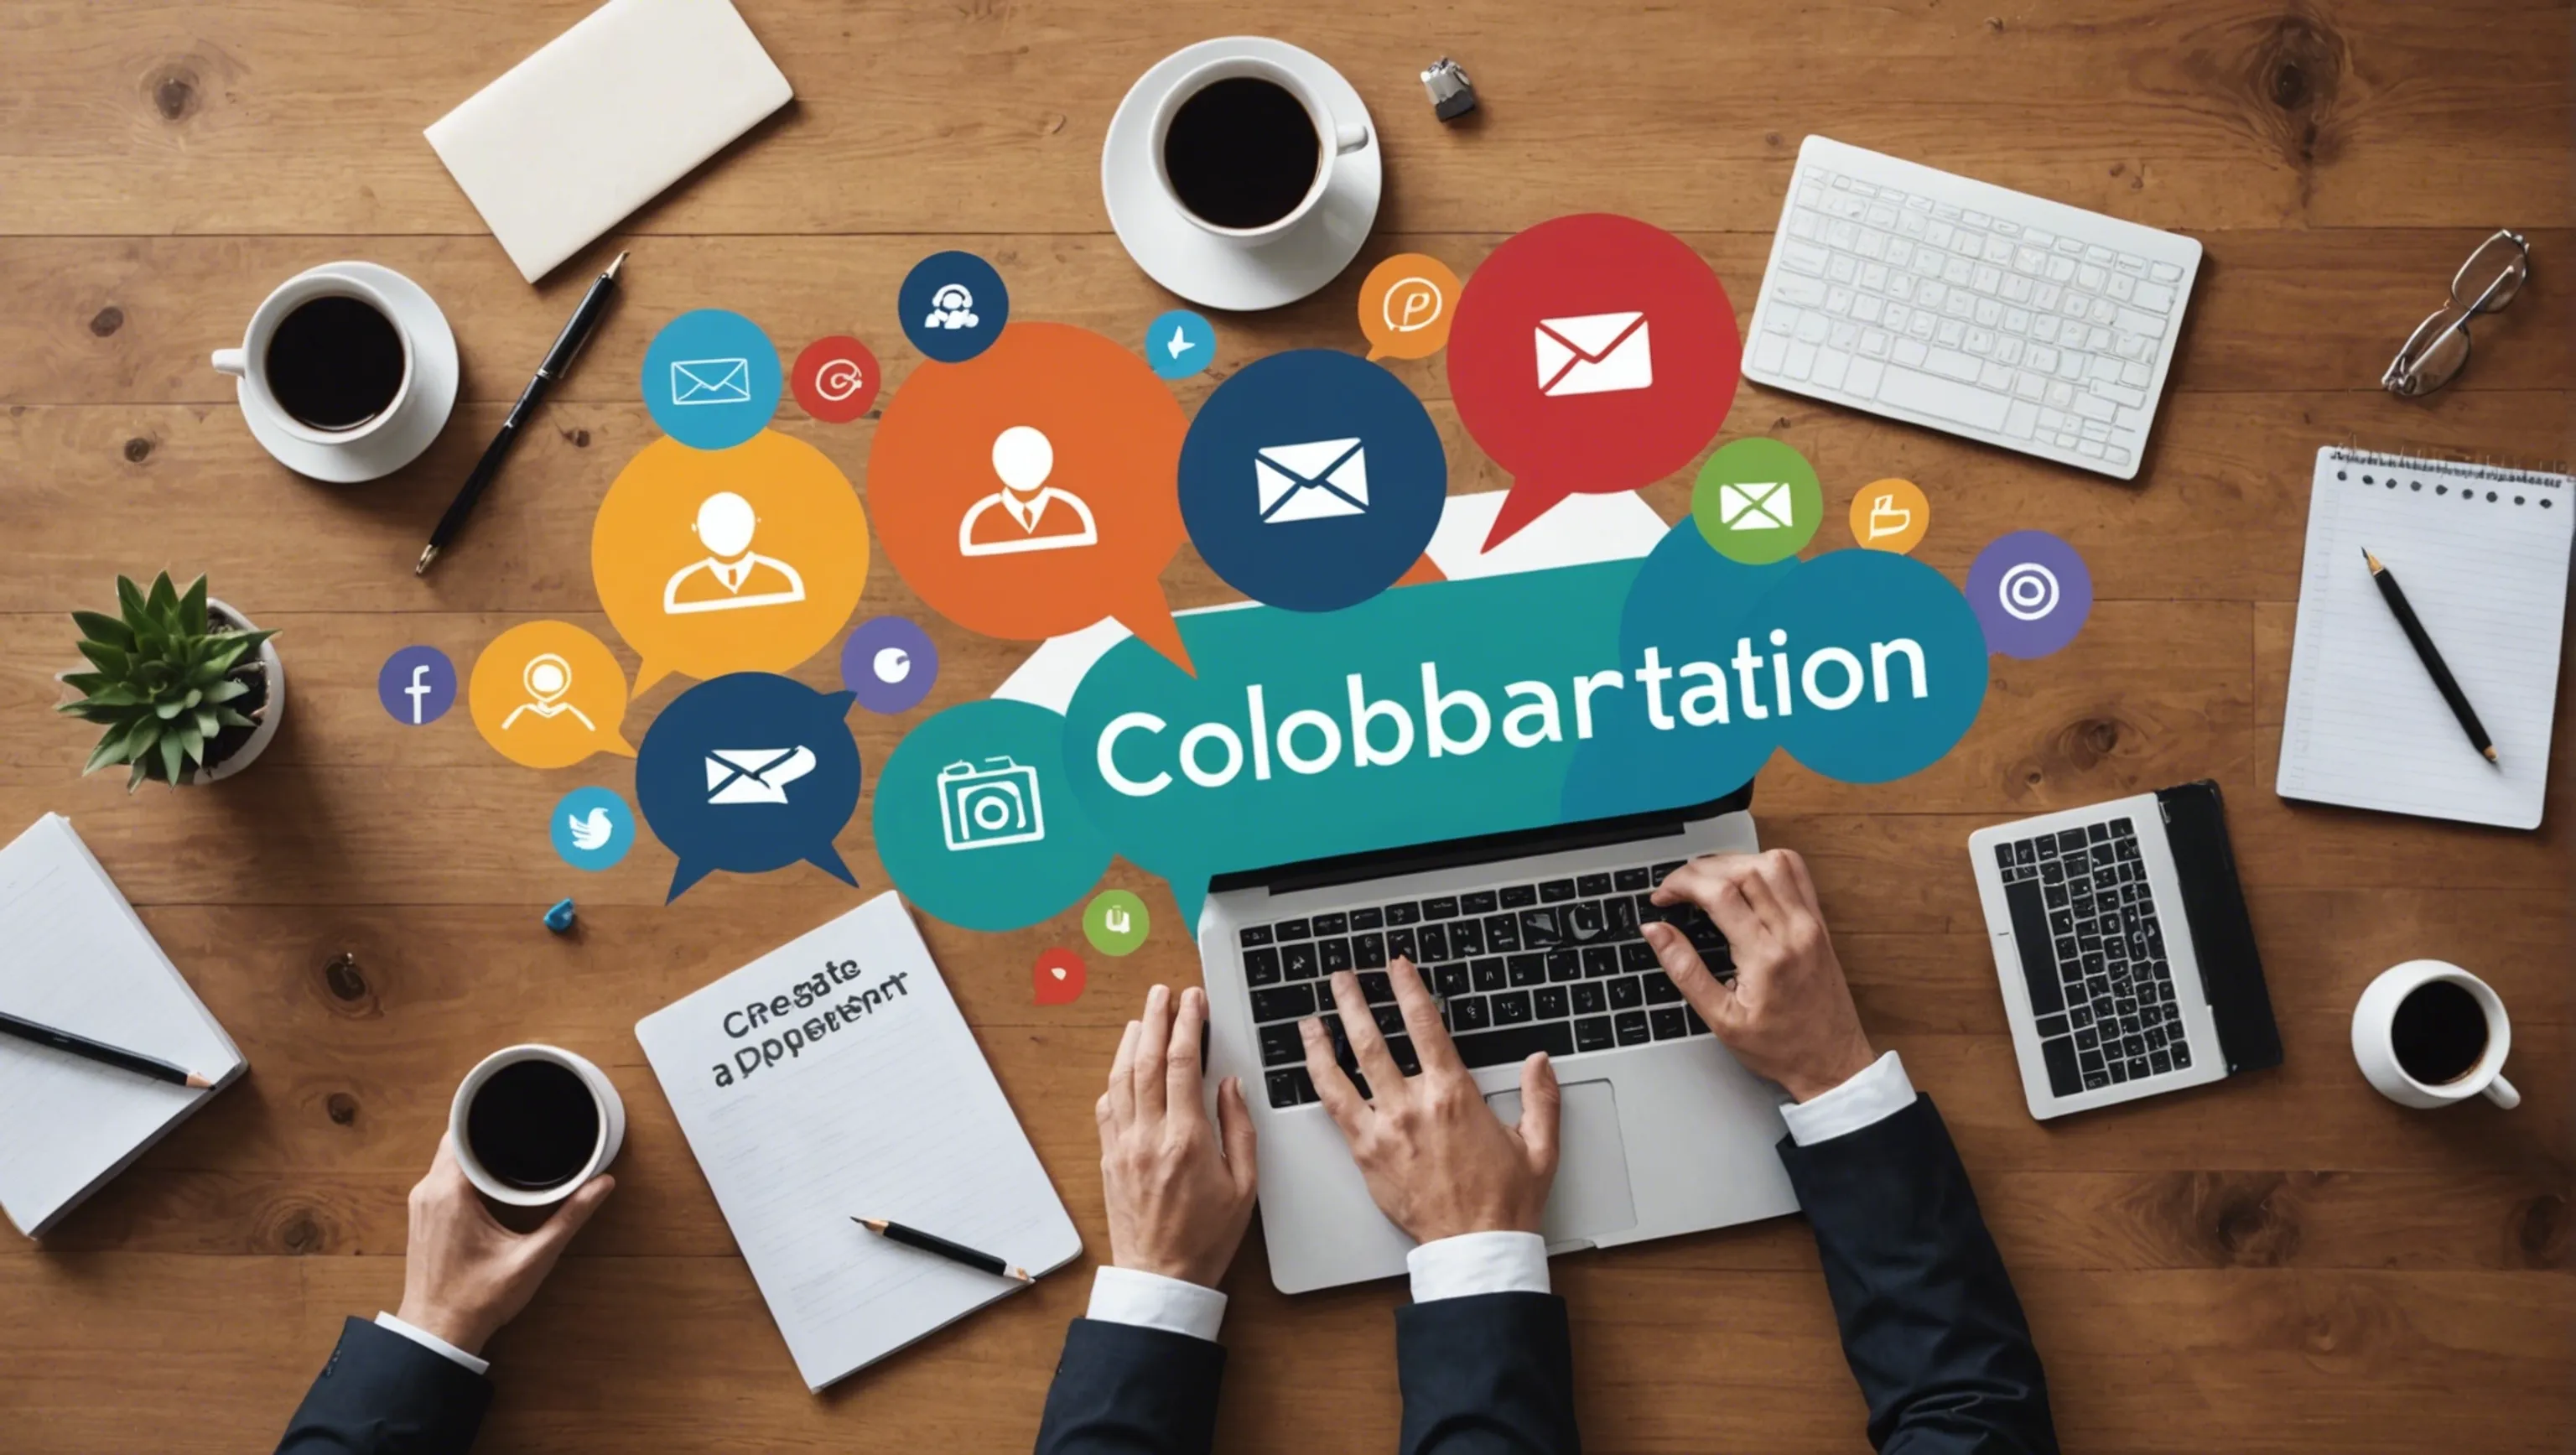 Reaching out and pitching collaboration ideas